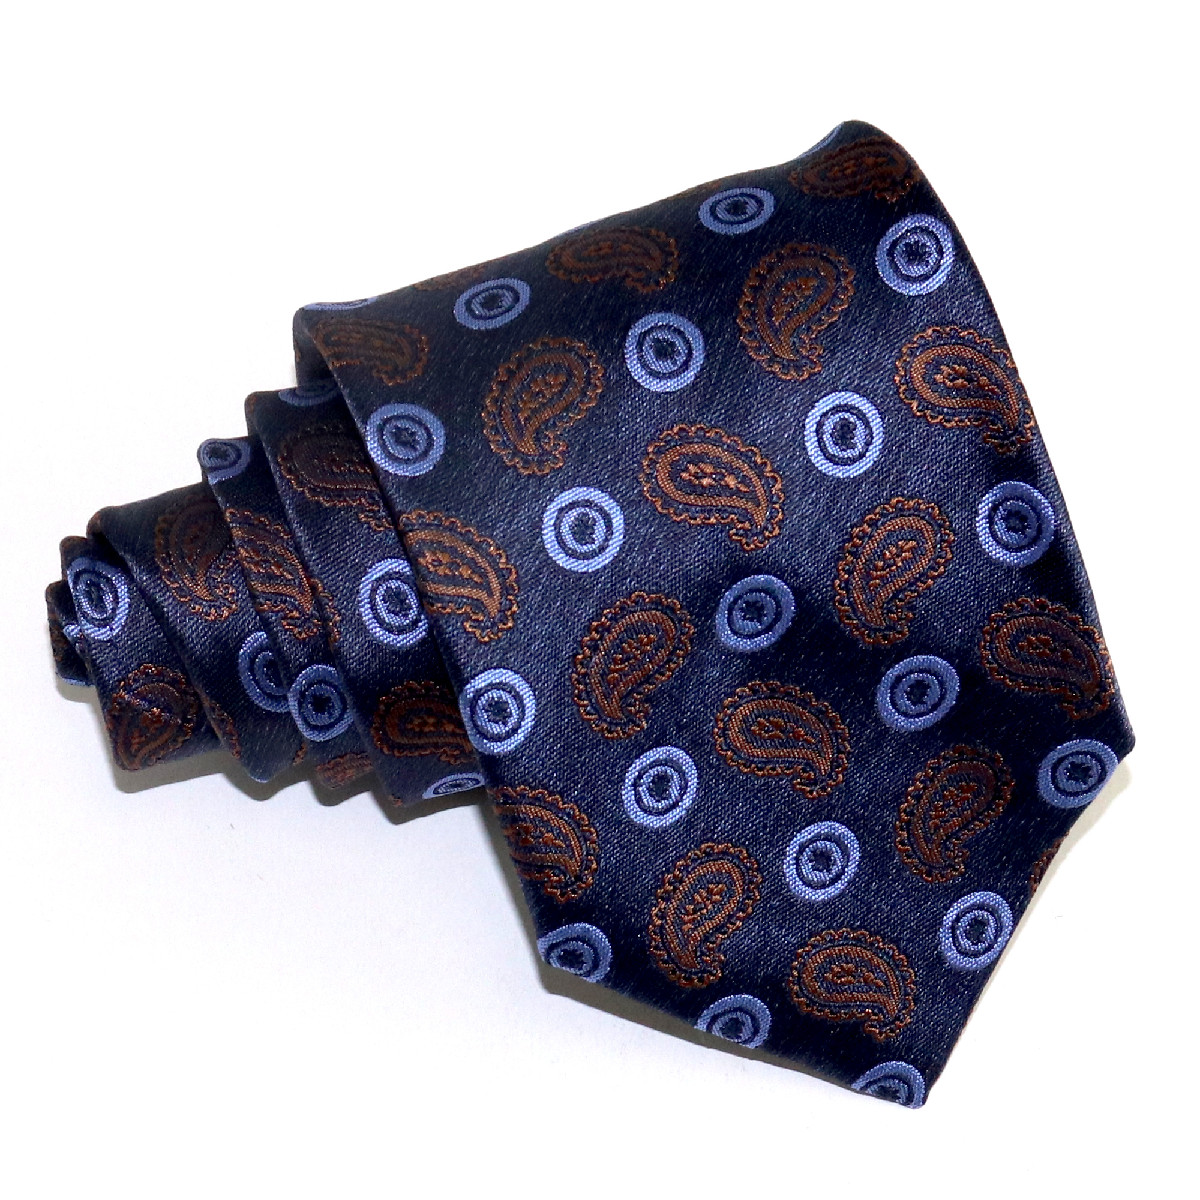 Polished navy blue woven silk tie, brown and light blue paisley pattern ...